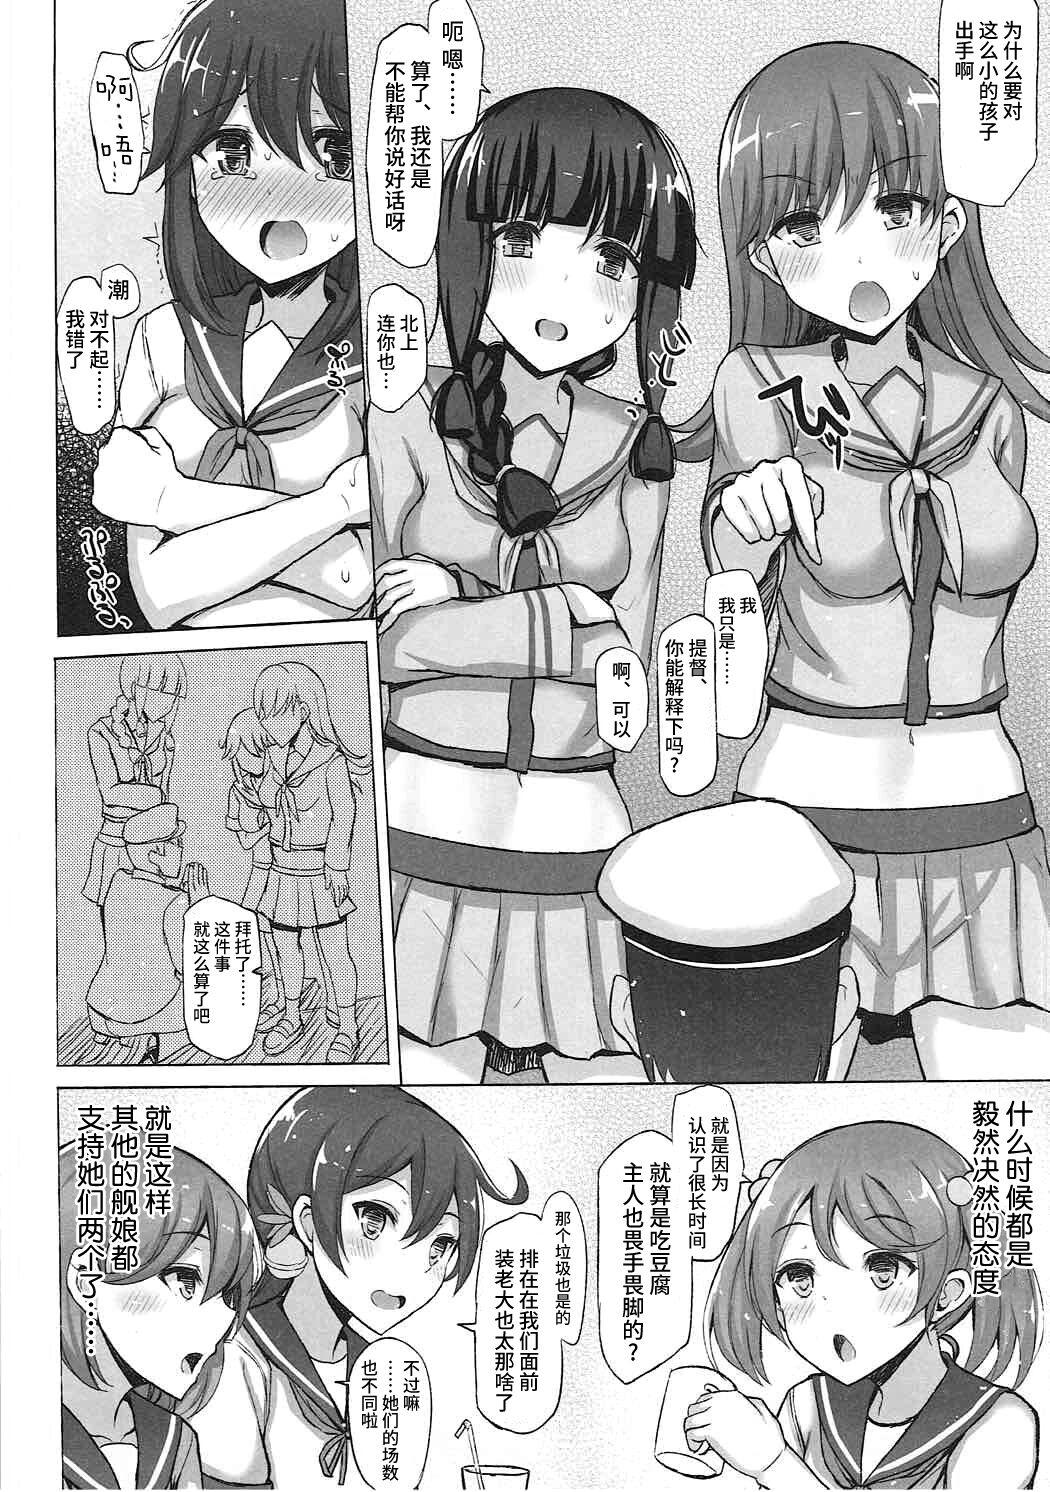 France AS YOU ARE. - Kantai collection Pornstar - Page 3